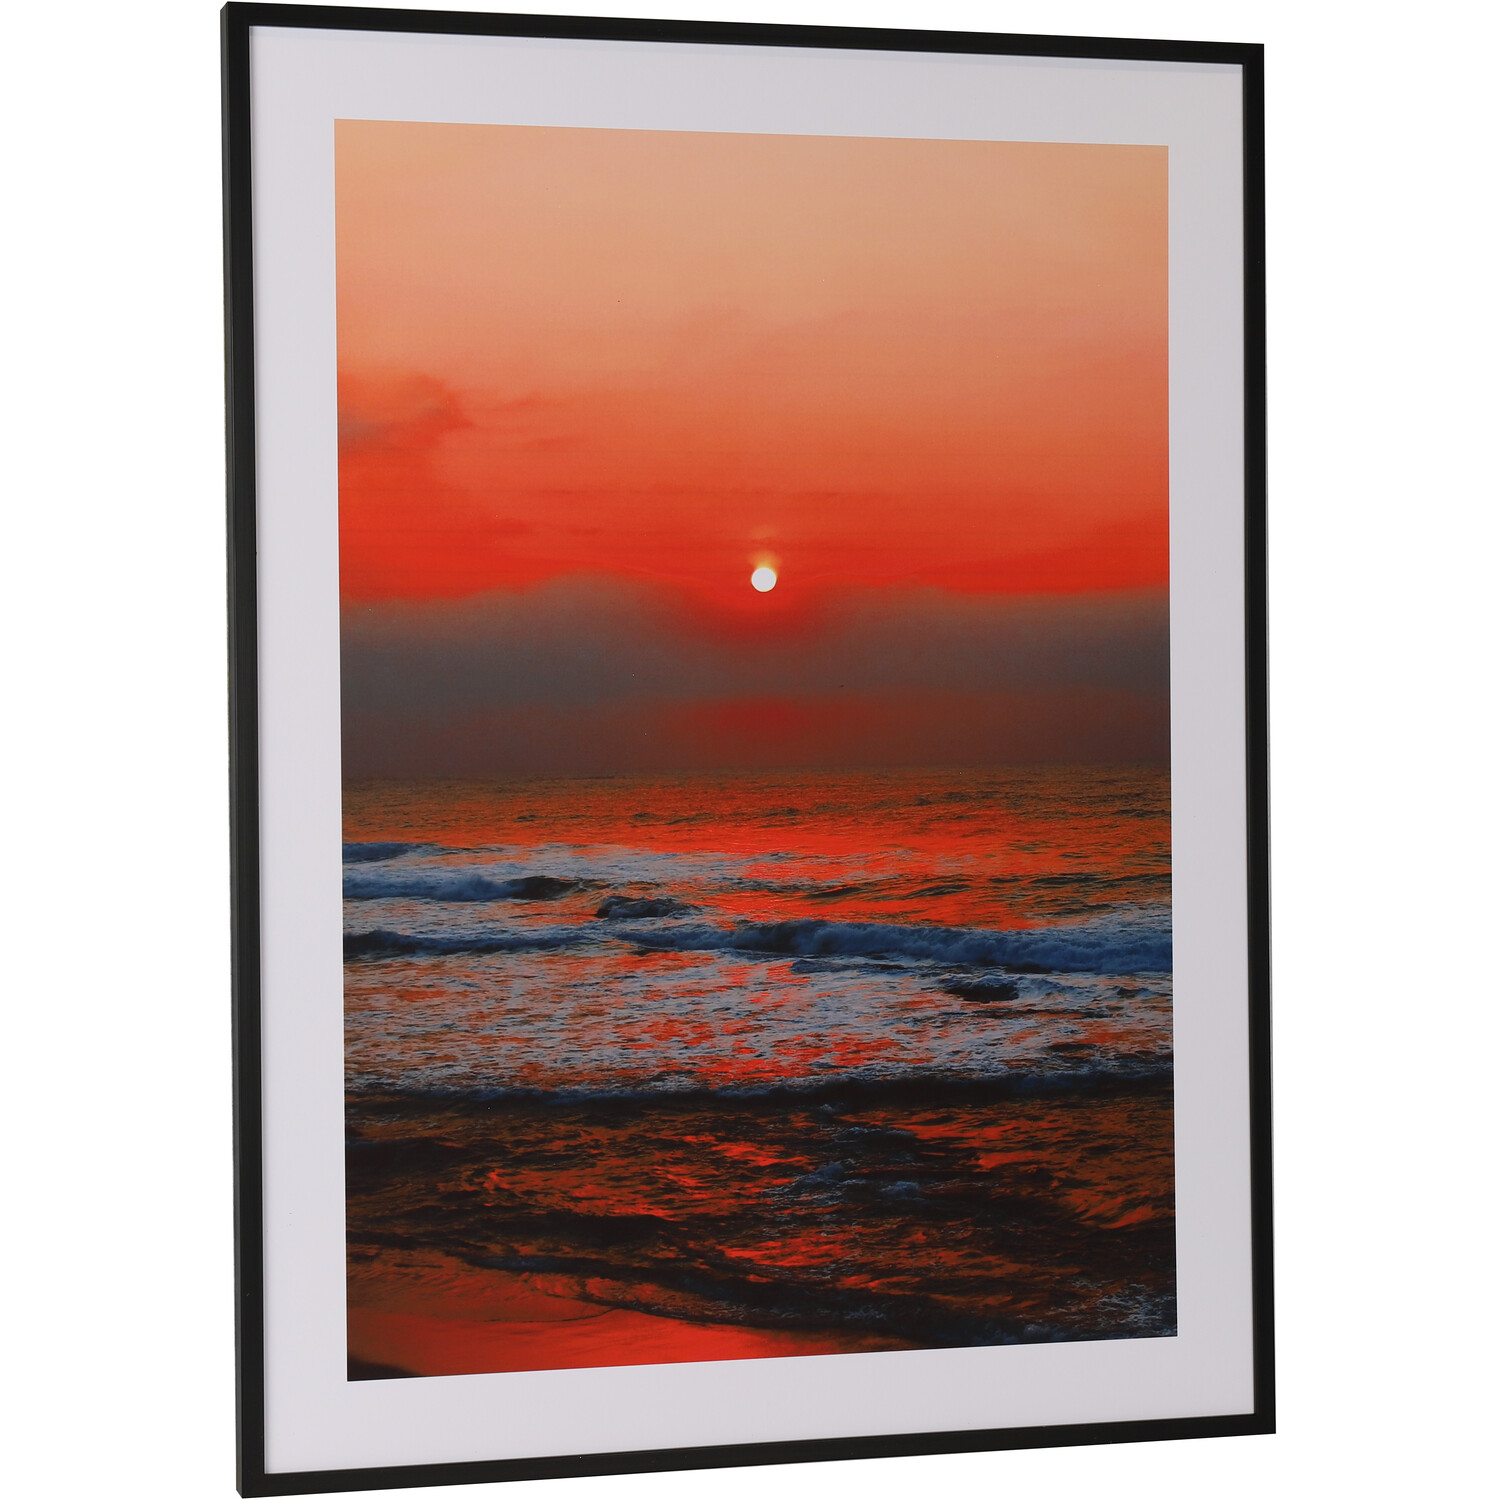 Sunset by the Sea Framed Print Image 4